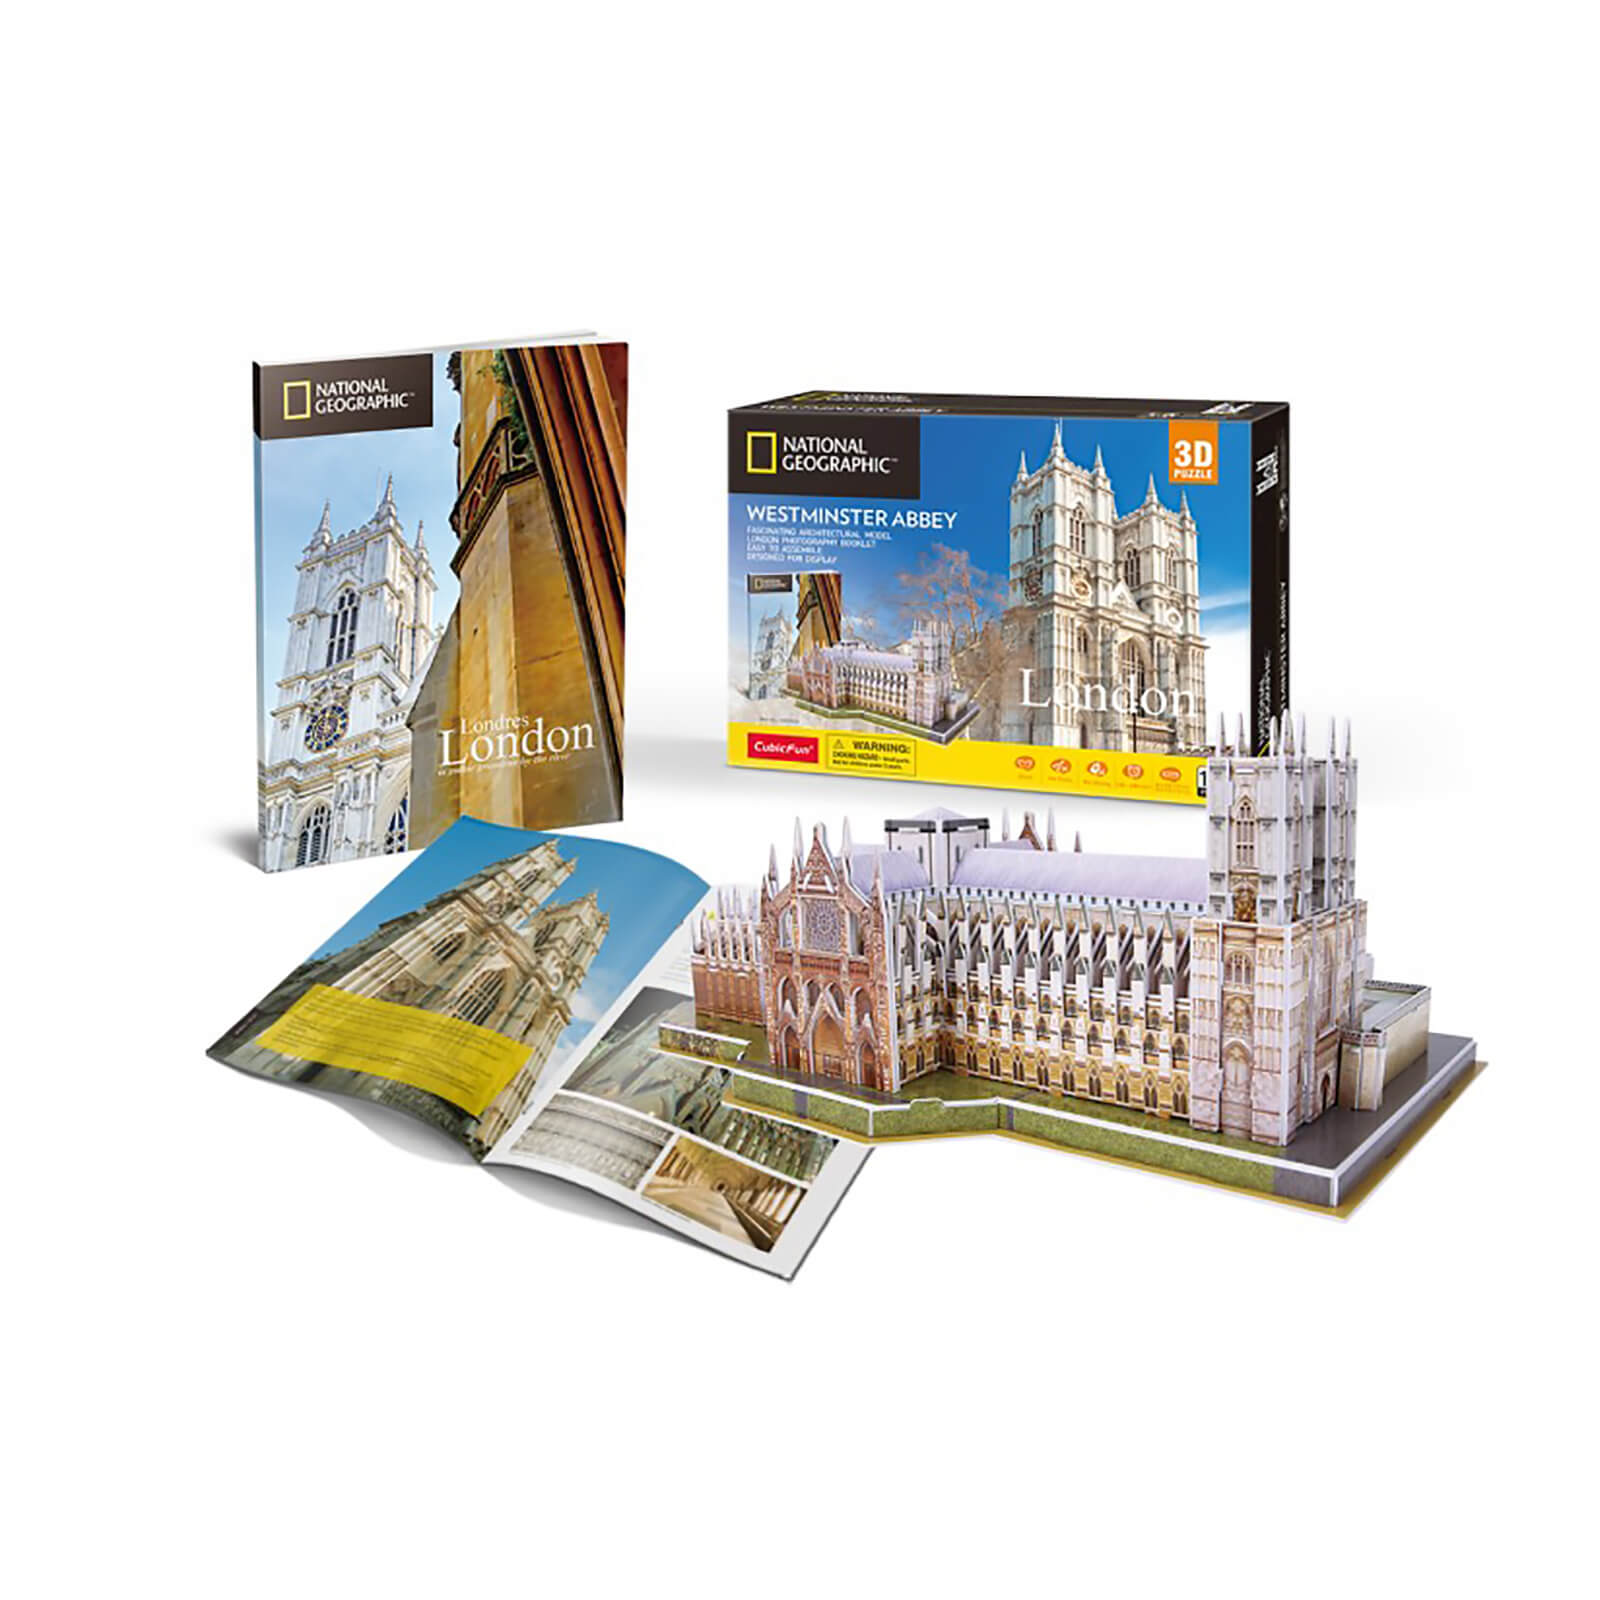 National Geographic - Westminster Abbey 3D Jigsaw Puzzle